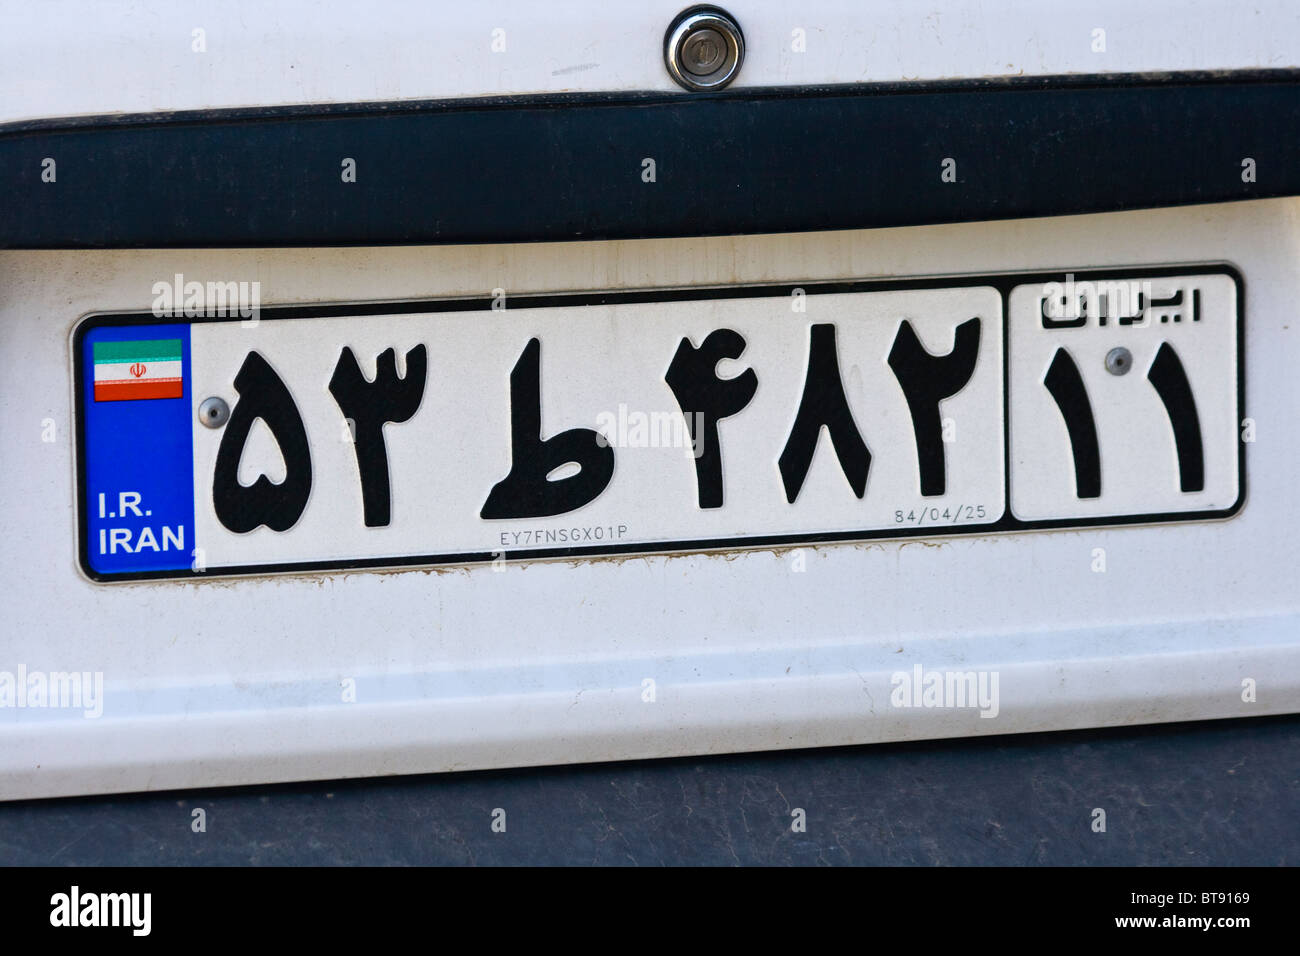 License plate on on a car in Mashhad, Iran Stock Photo